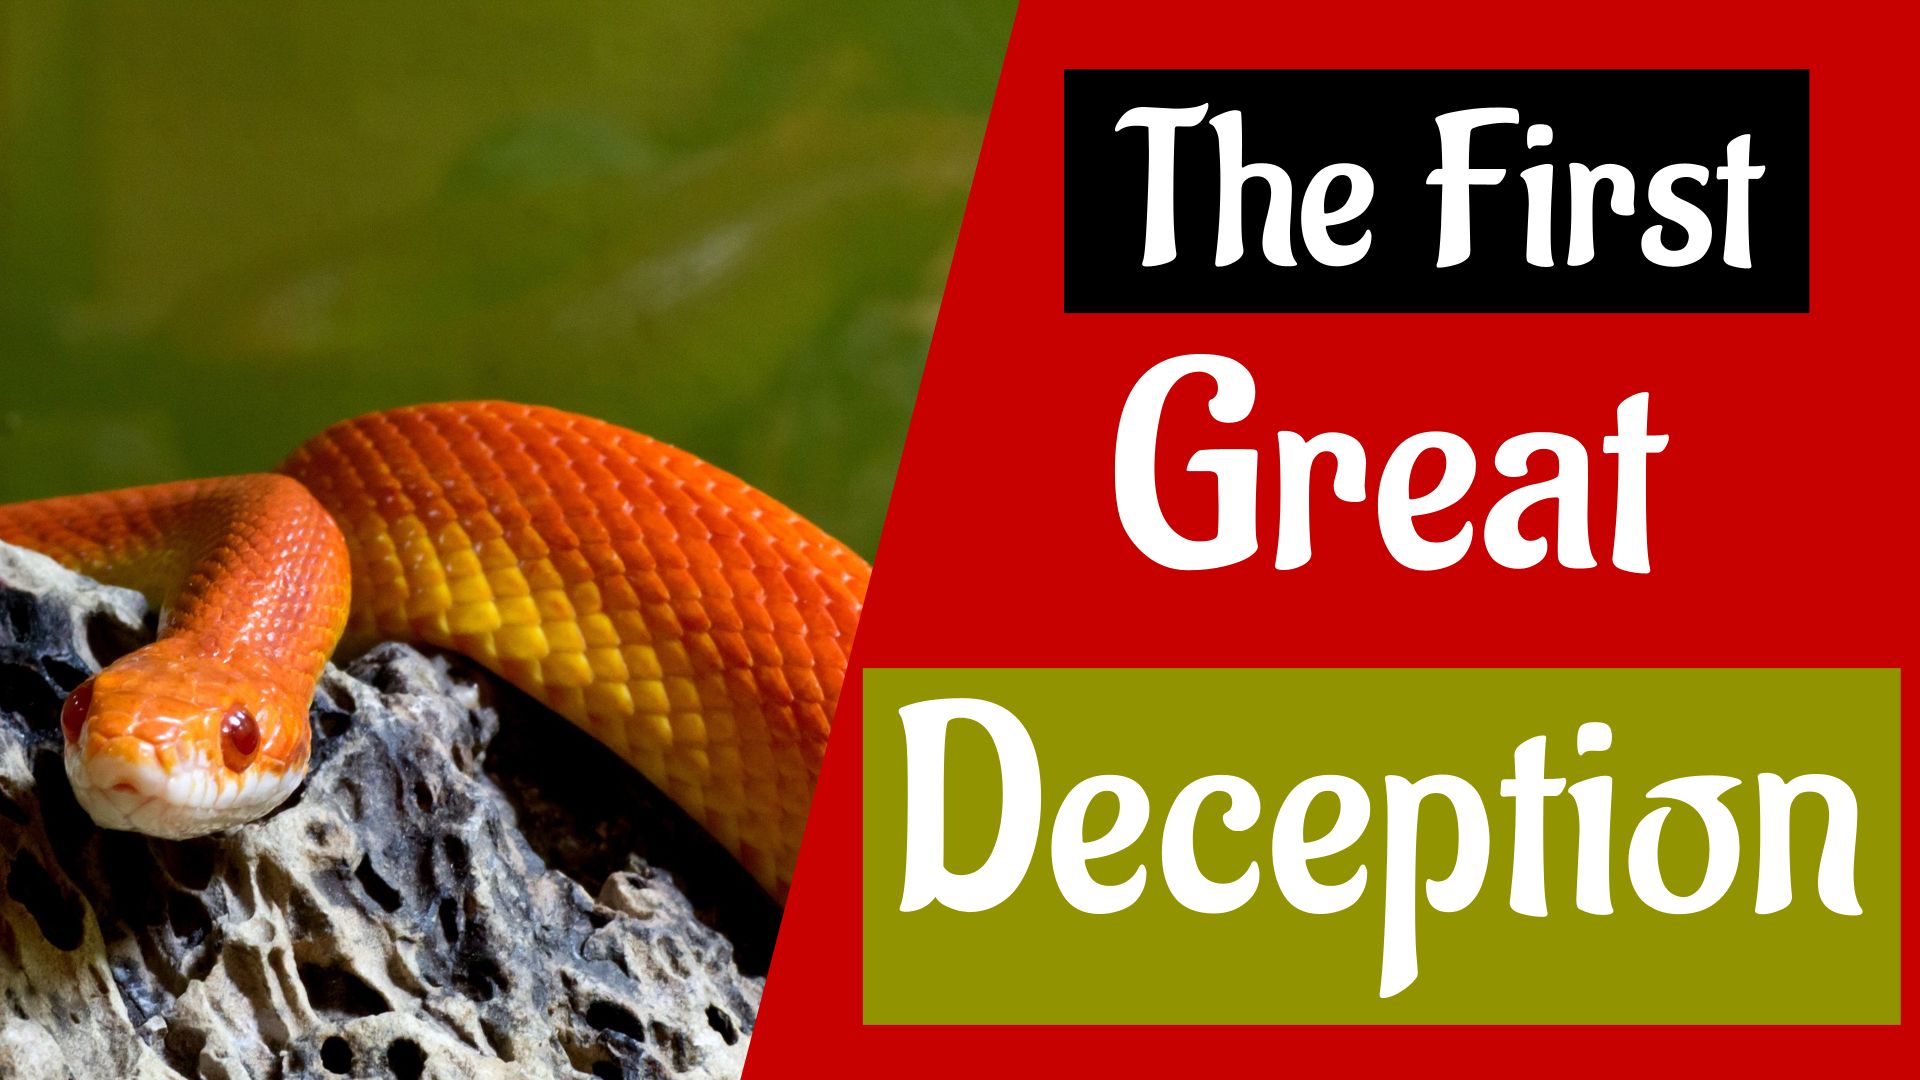 The First Great Deception